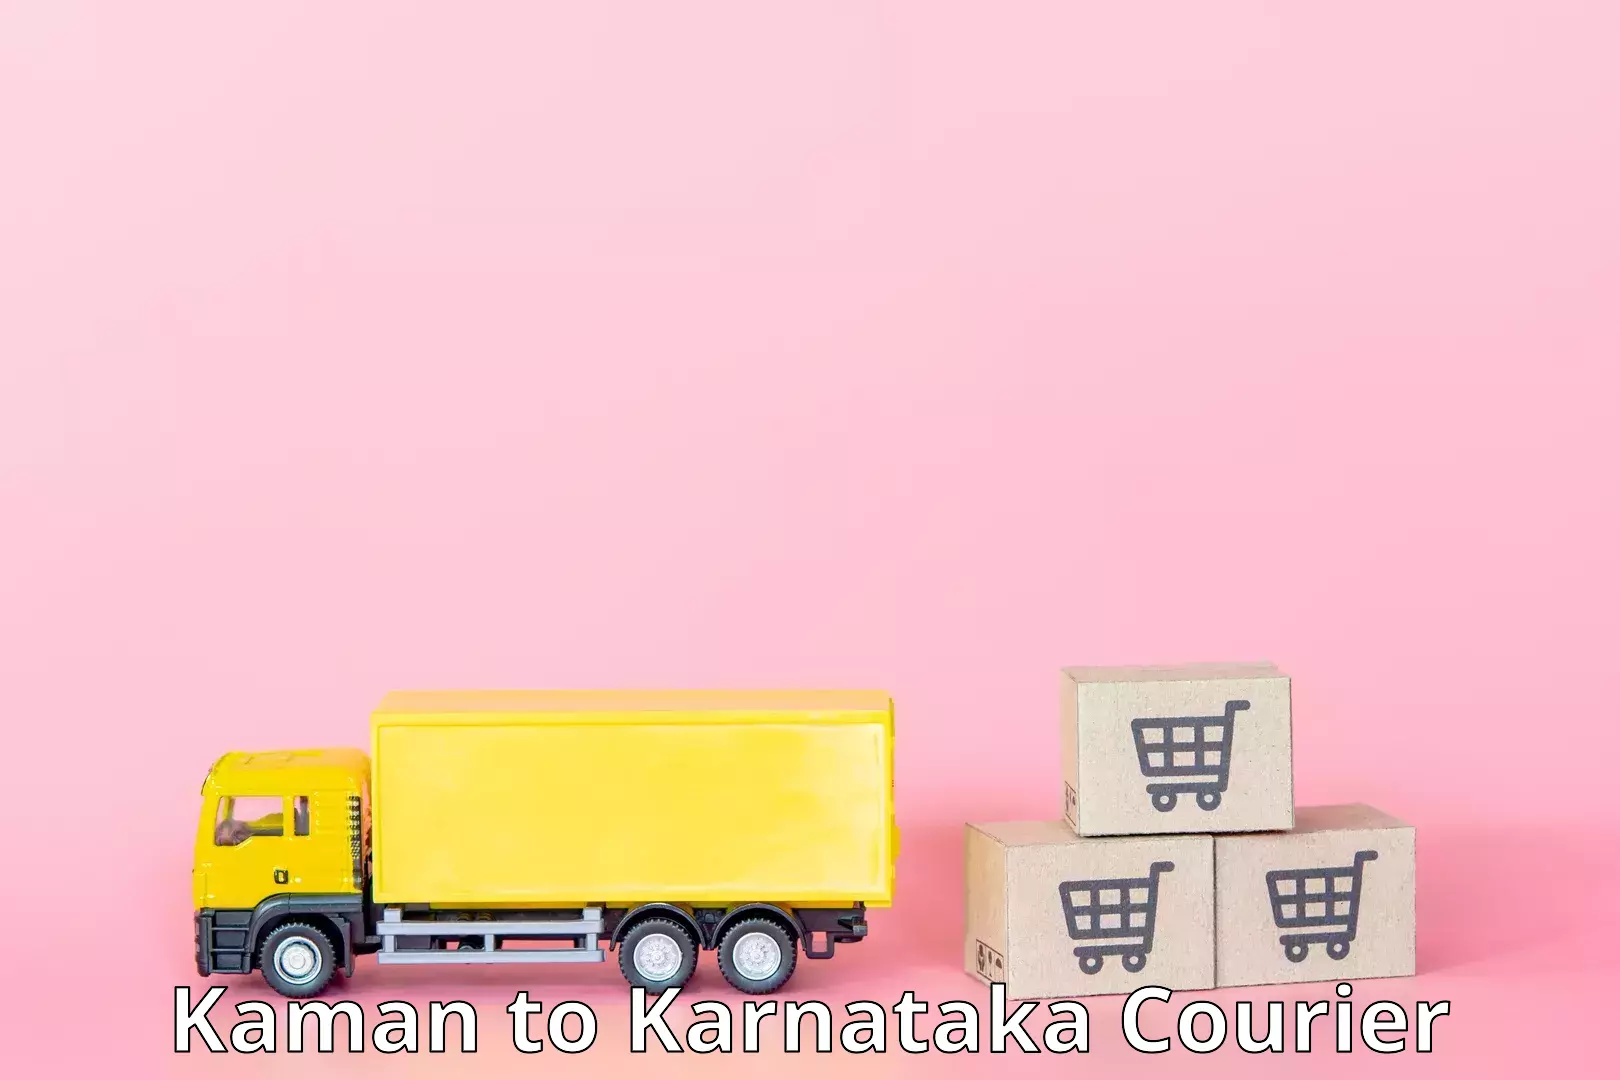 Package delivery network Kaman to Mangalore Port